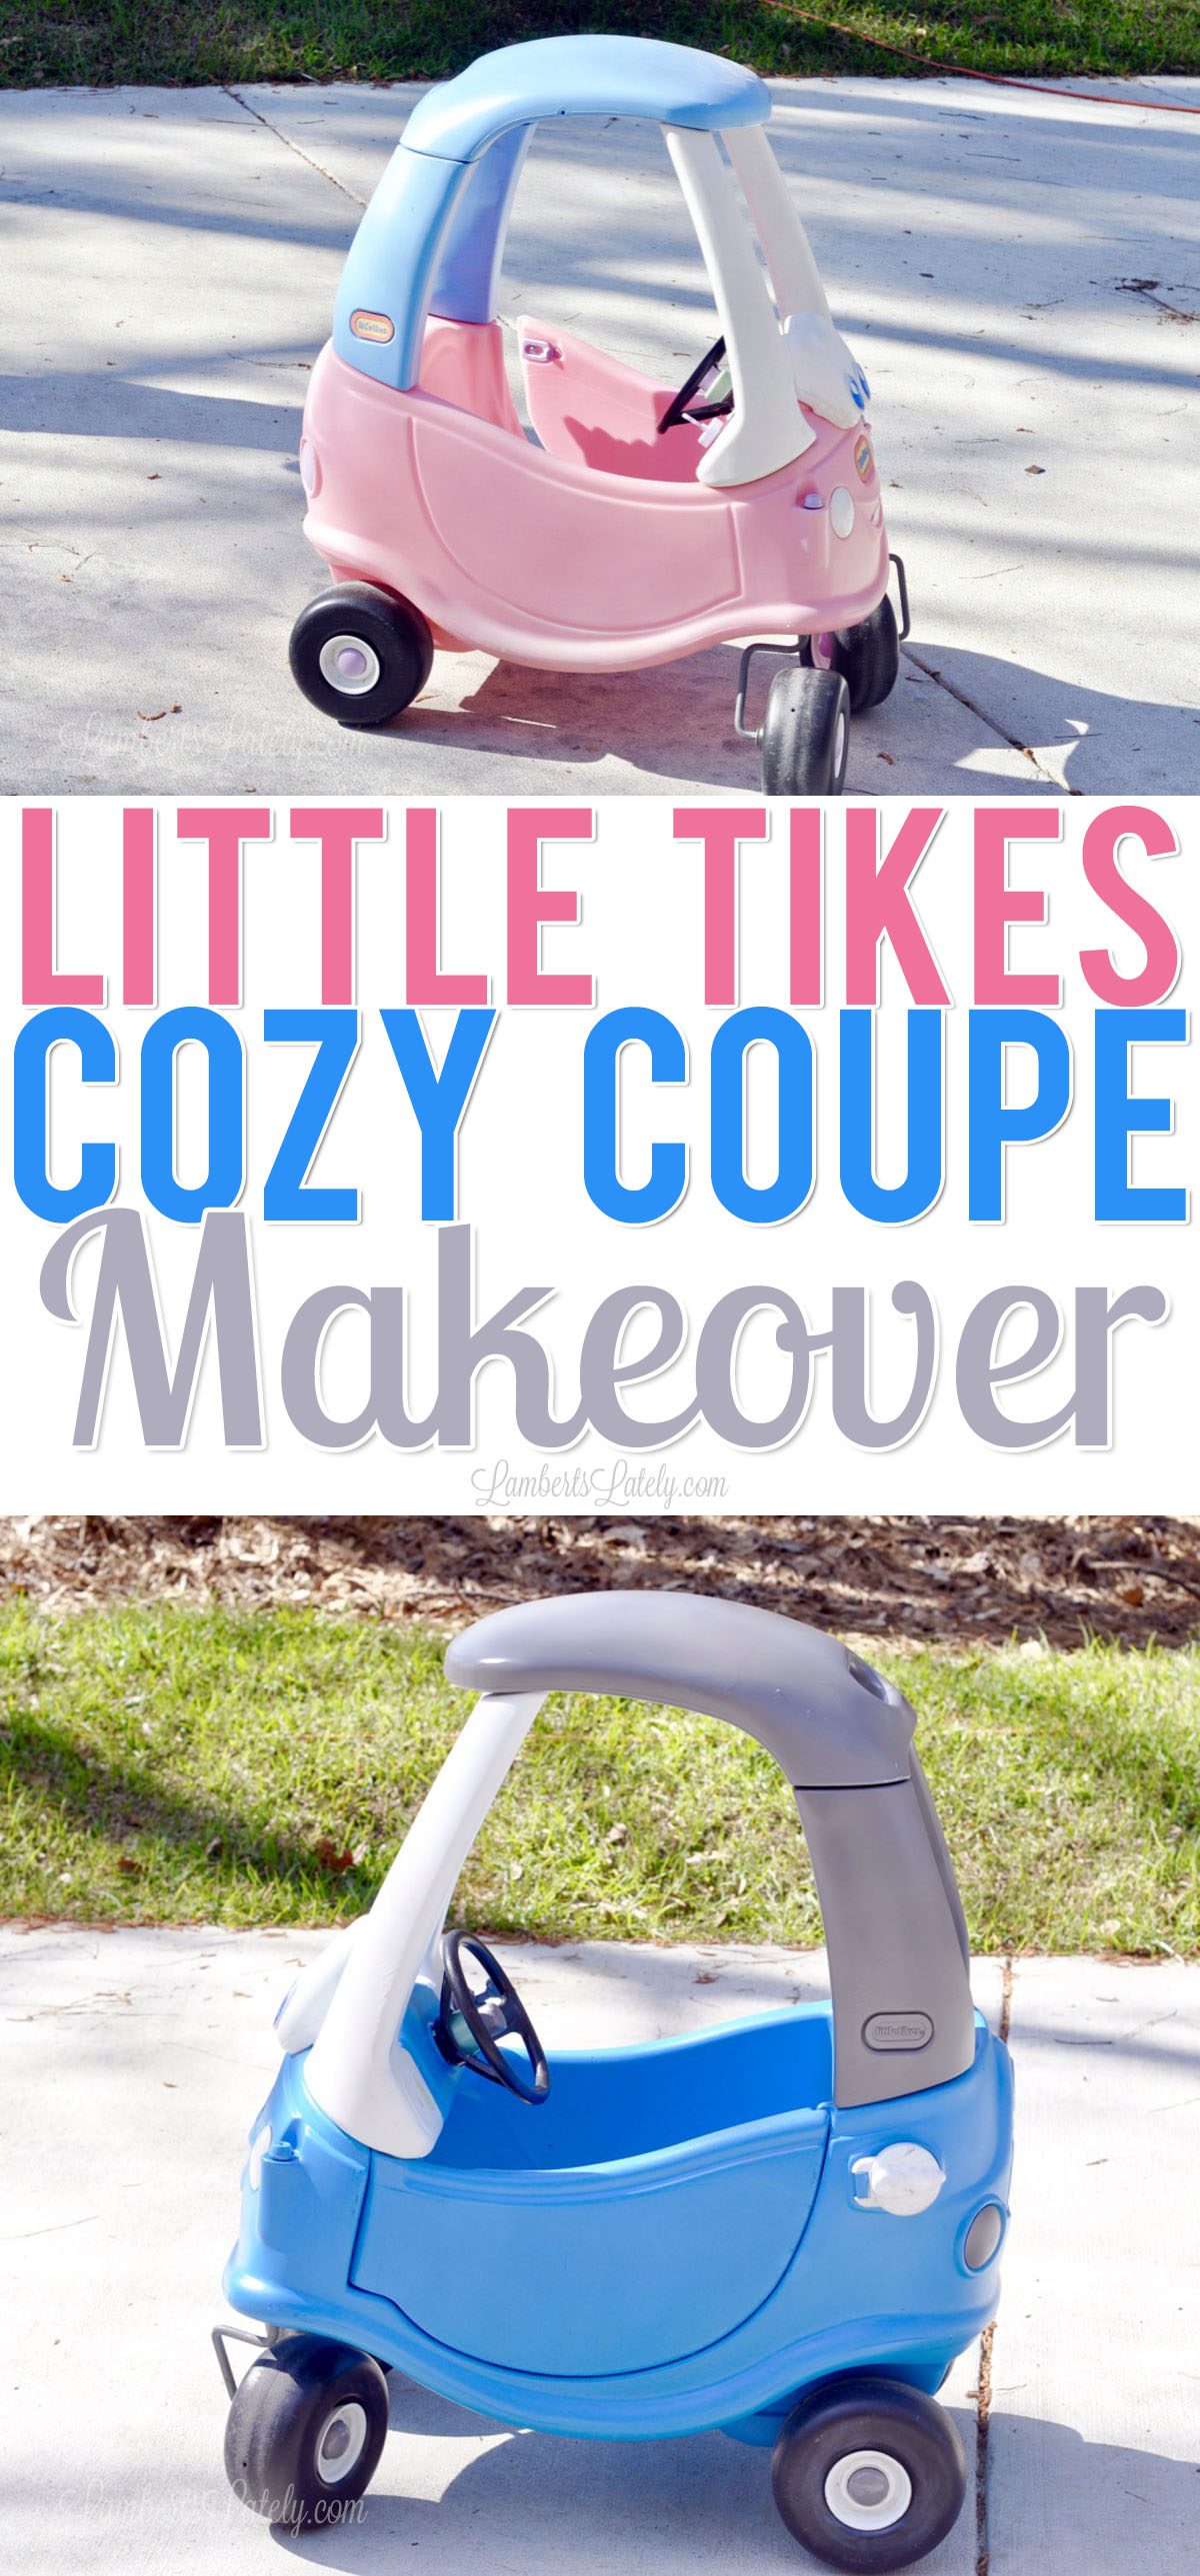 little tikes cozy coupe makeover.